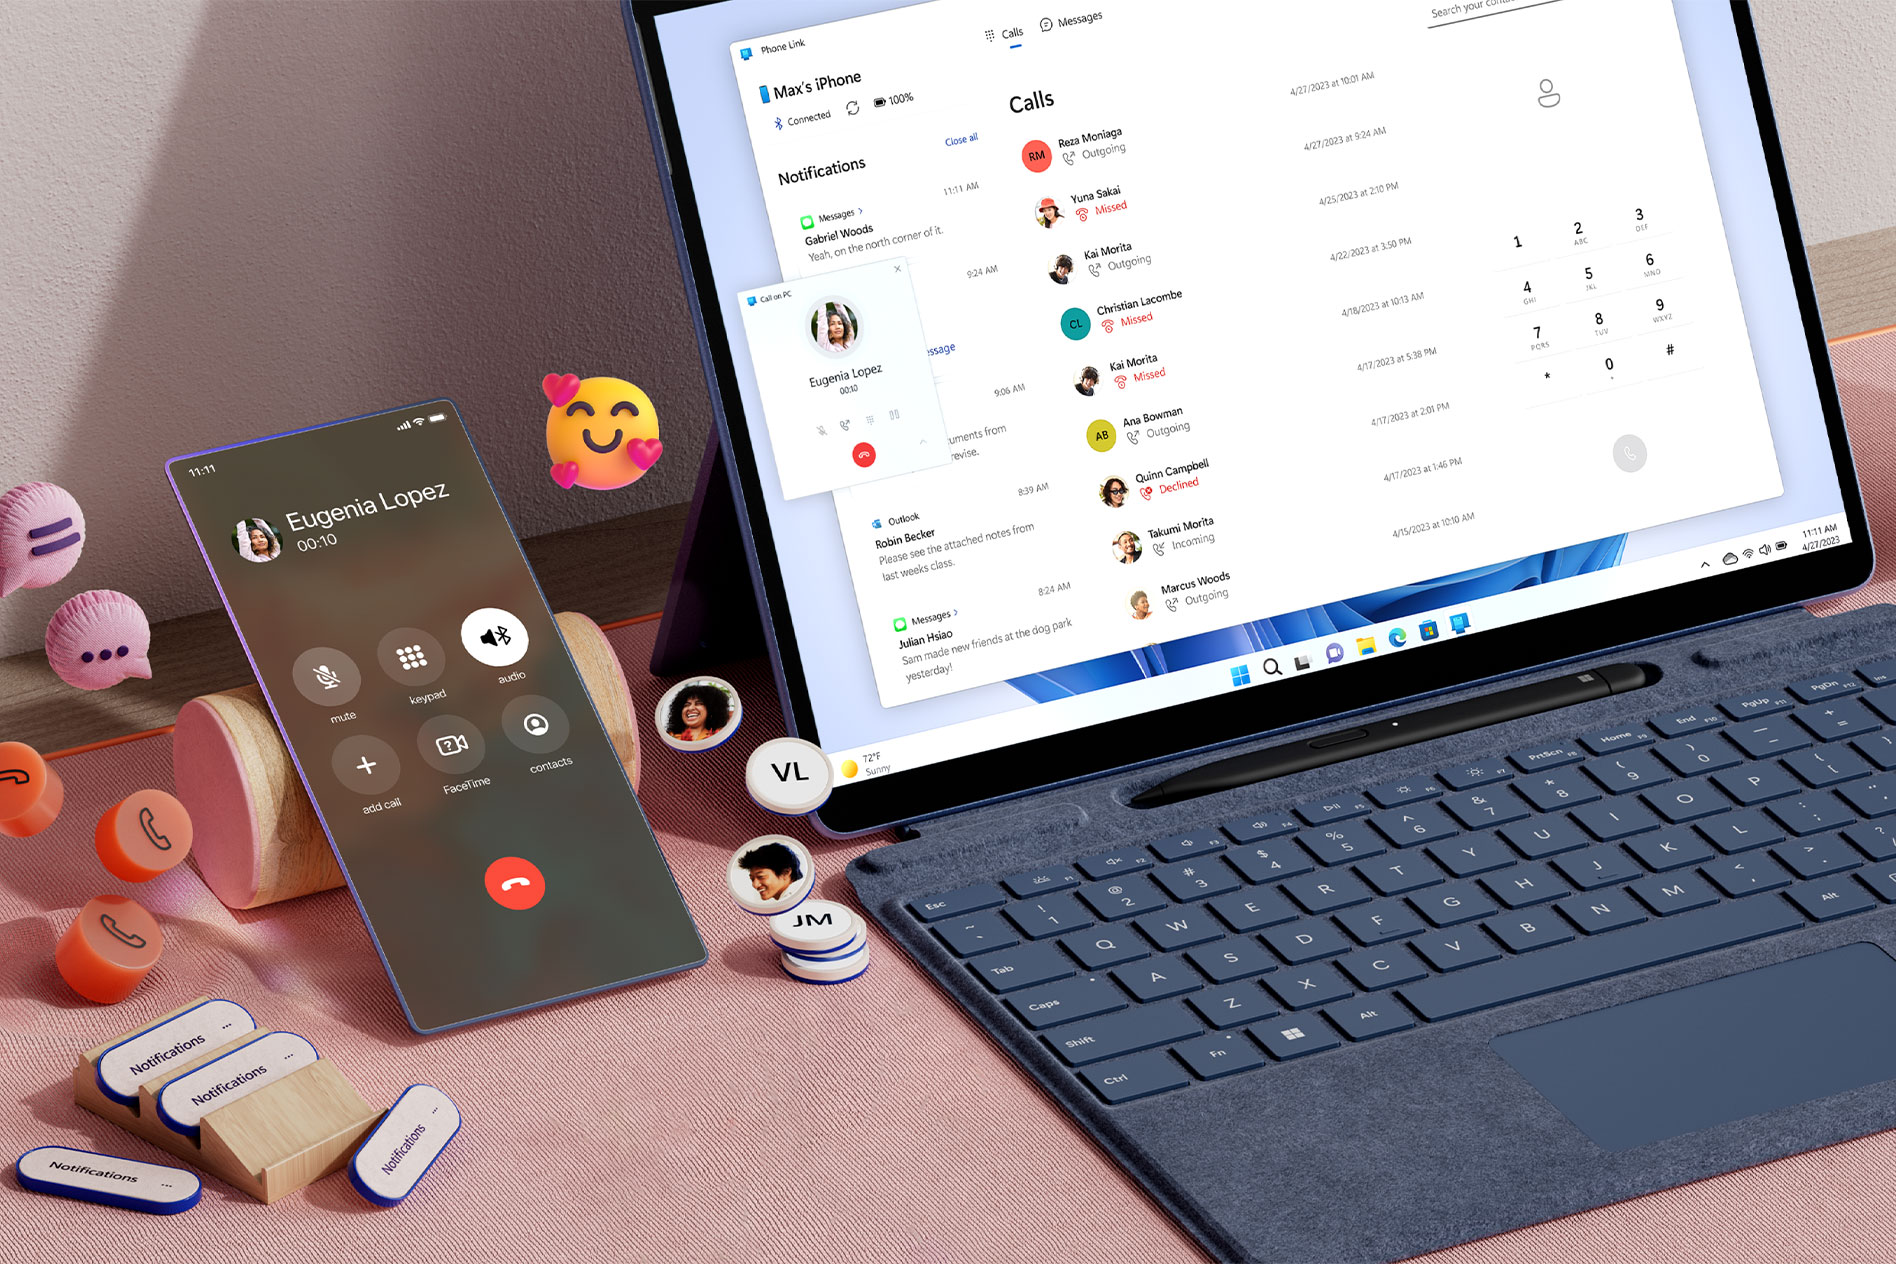 A Surface Pro 9 on a desk with phone call notifications on screen while a mobile phone rests next to the device with phone and chat icons and emojis floating around the phone.